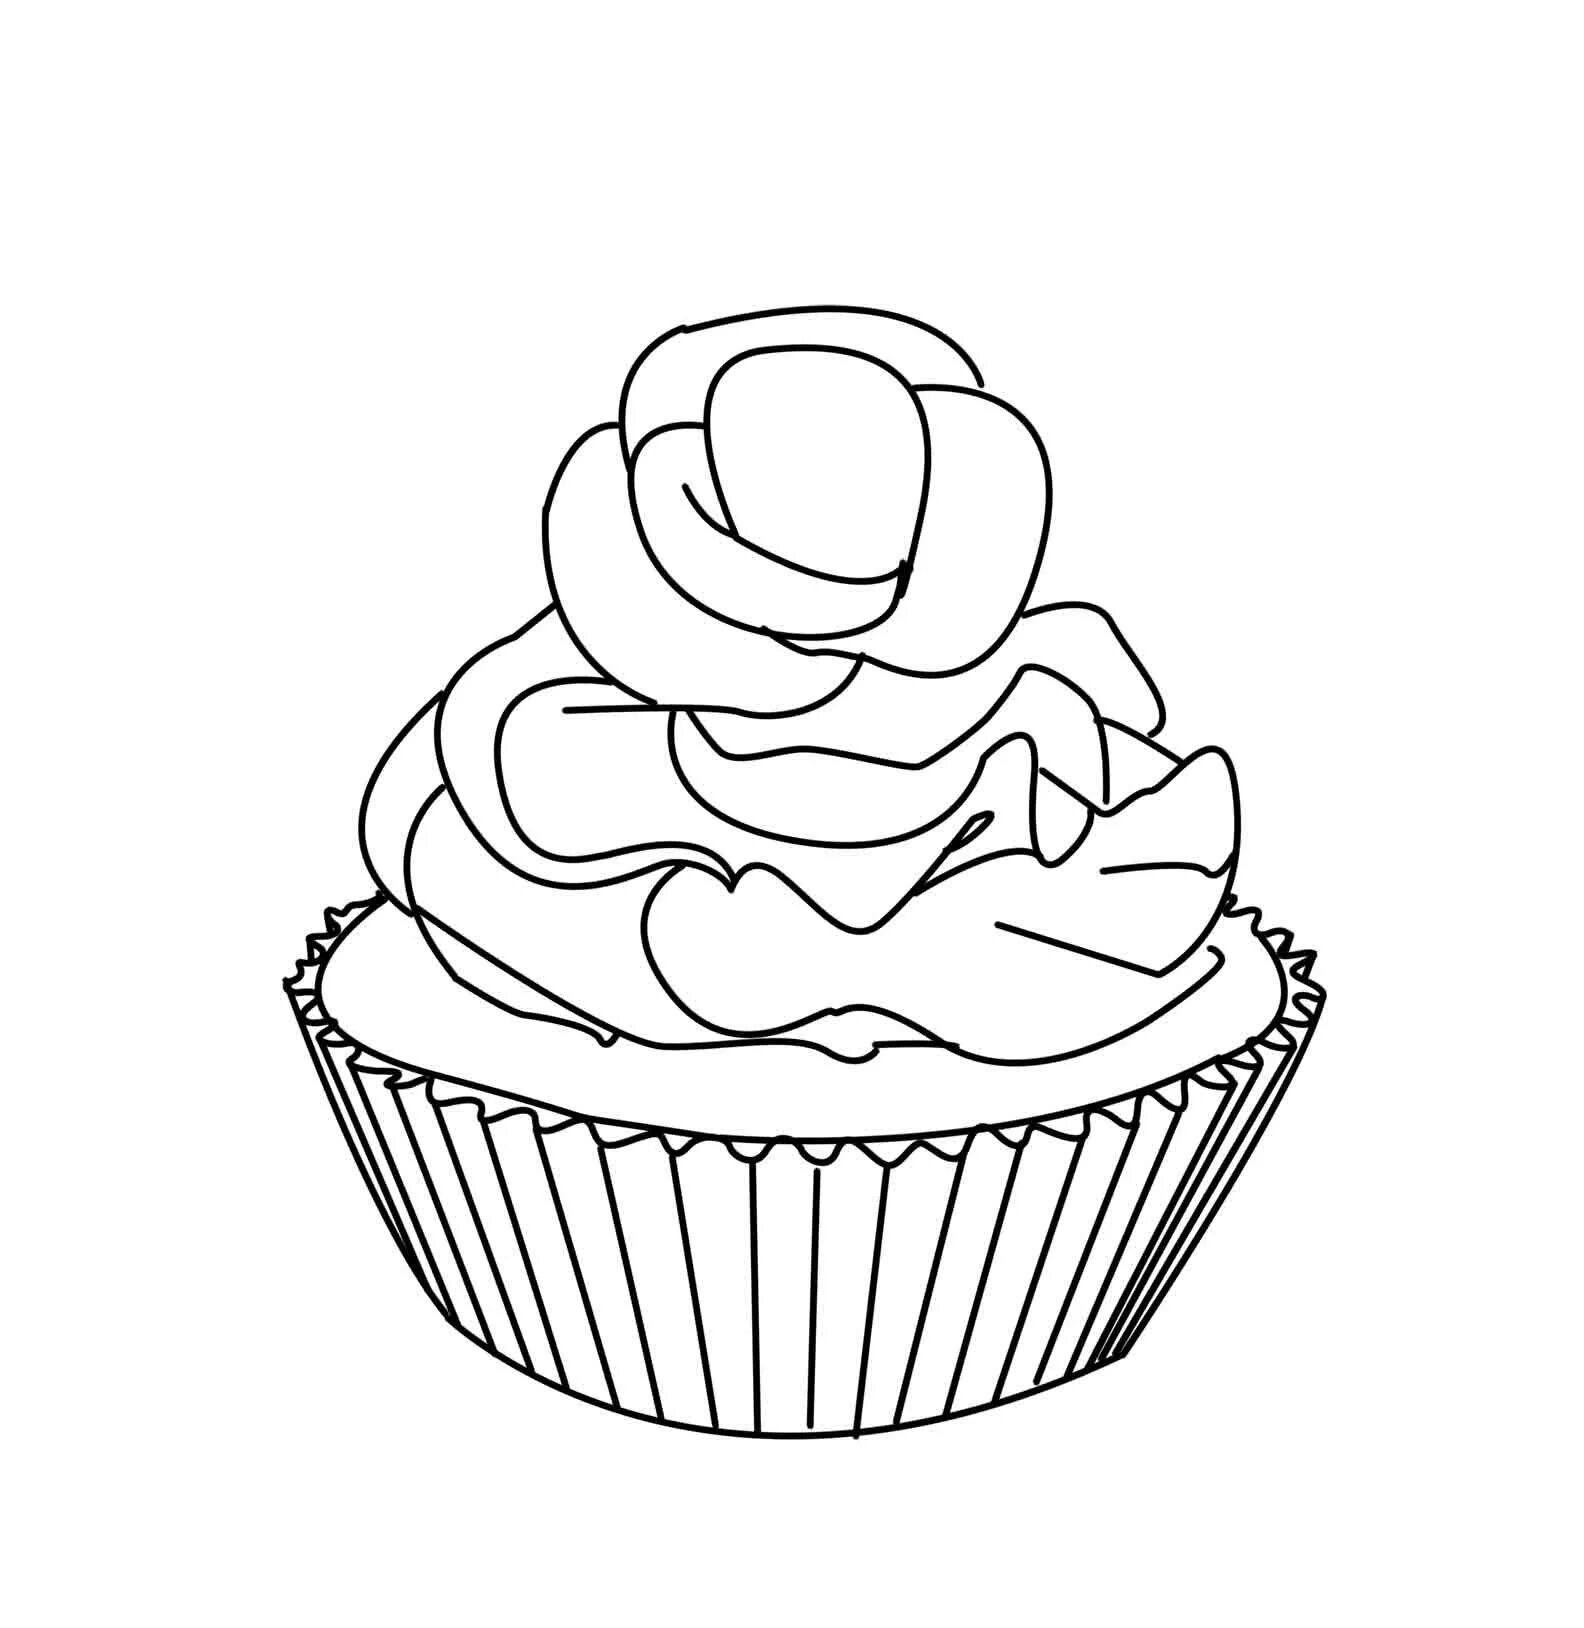 Cupcakes and pies #8